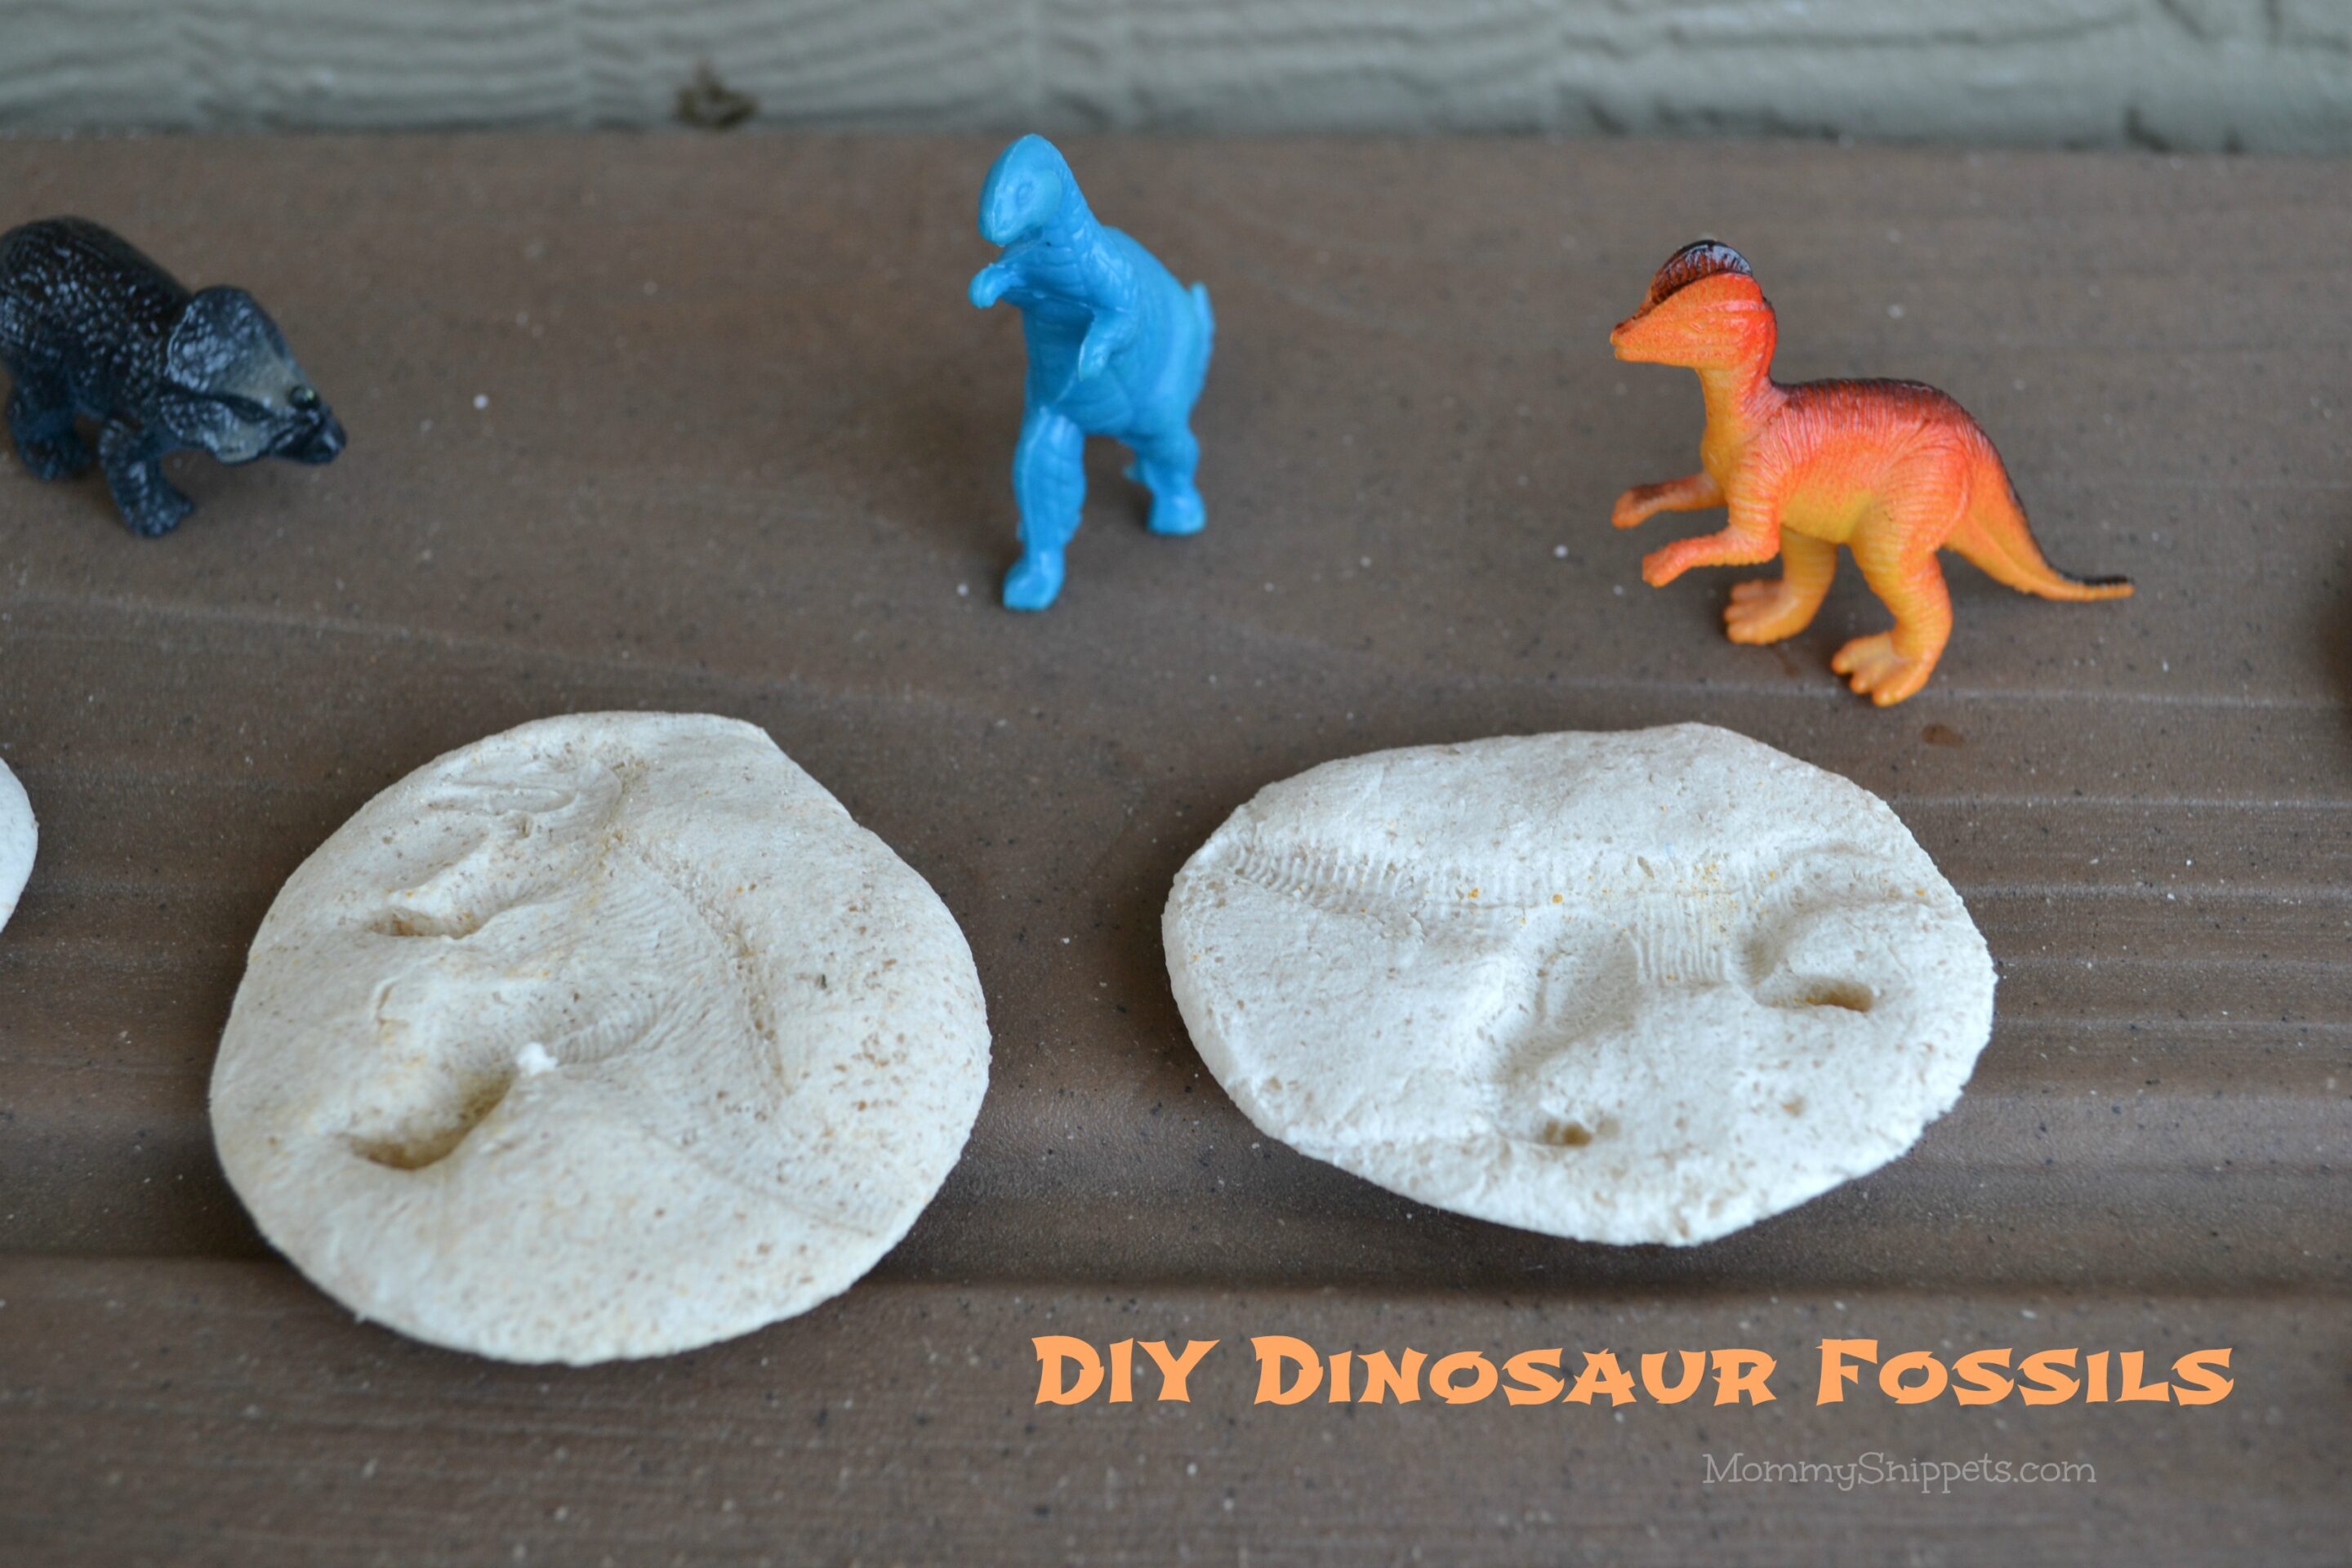 How to Make a Dinosaur Fossils Craft (+ Free Dinosaur Coloring Pages)